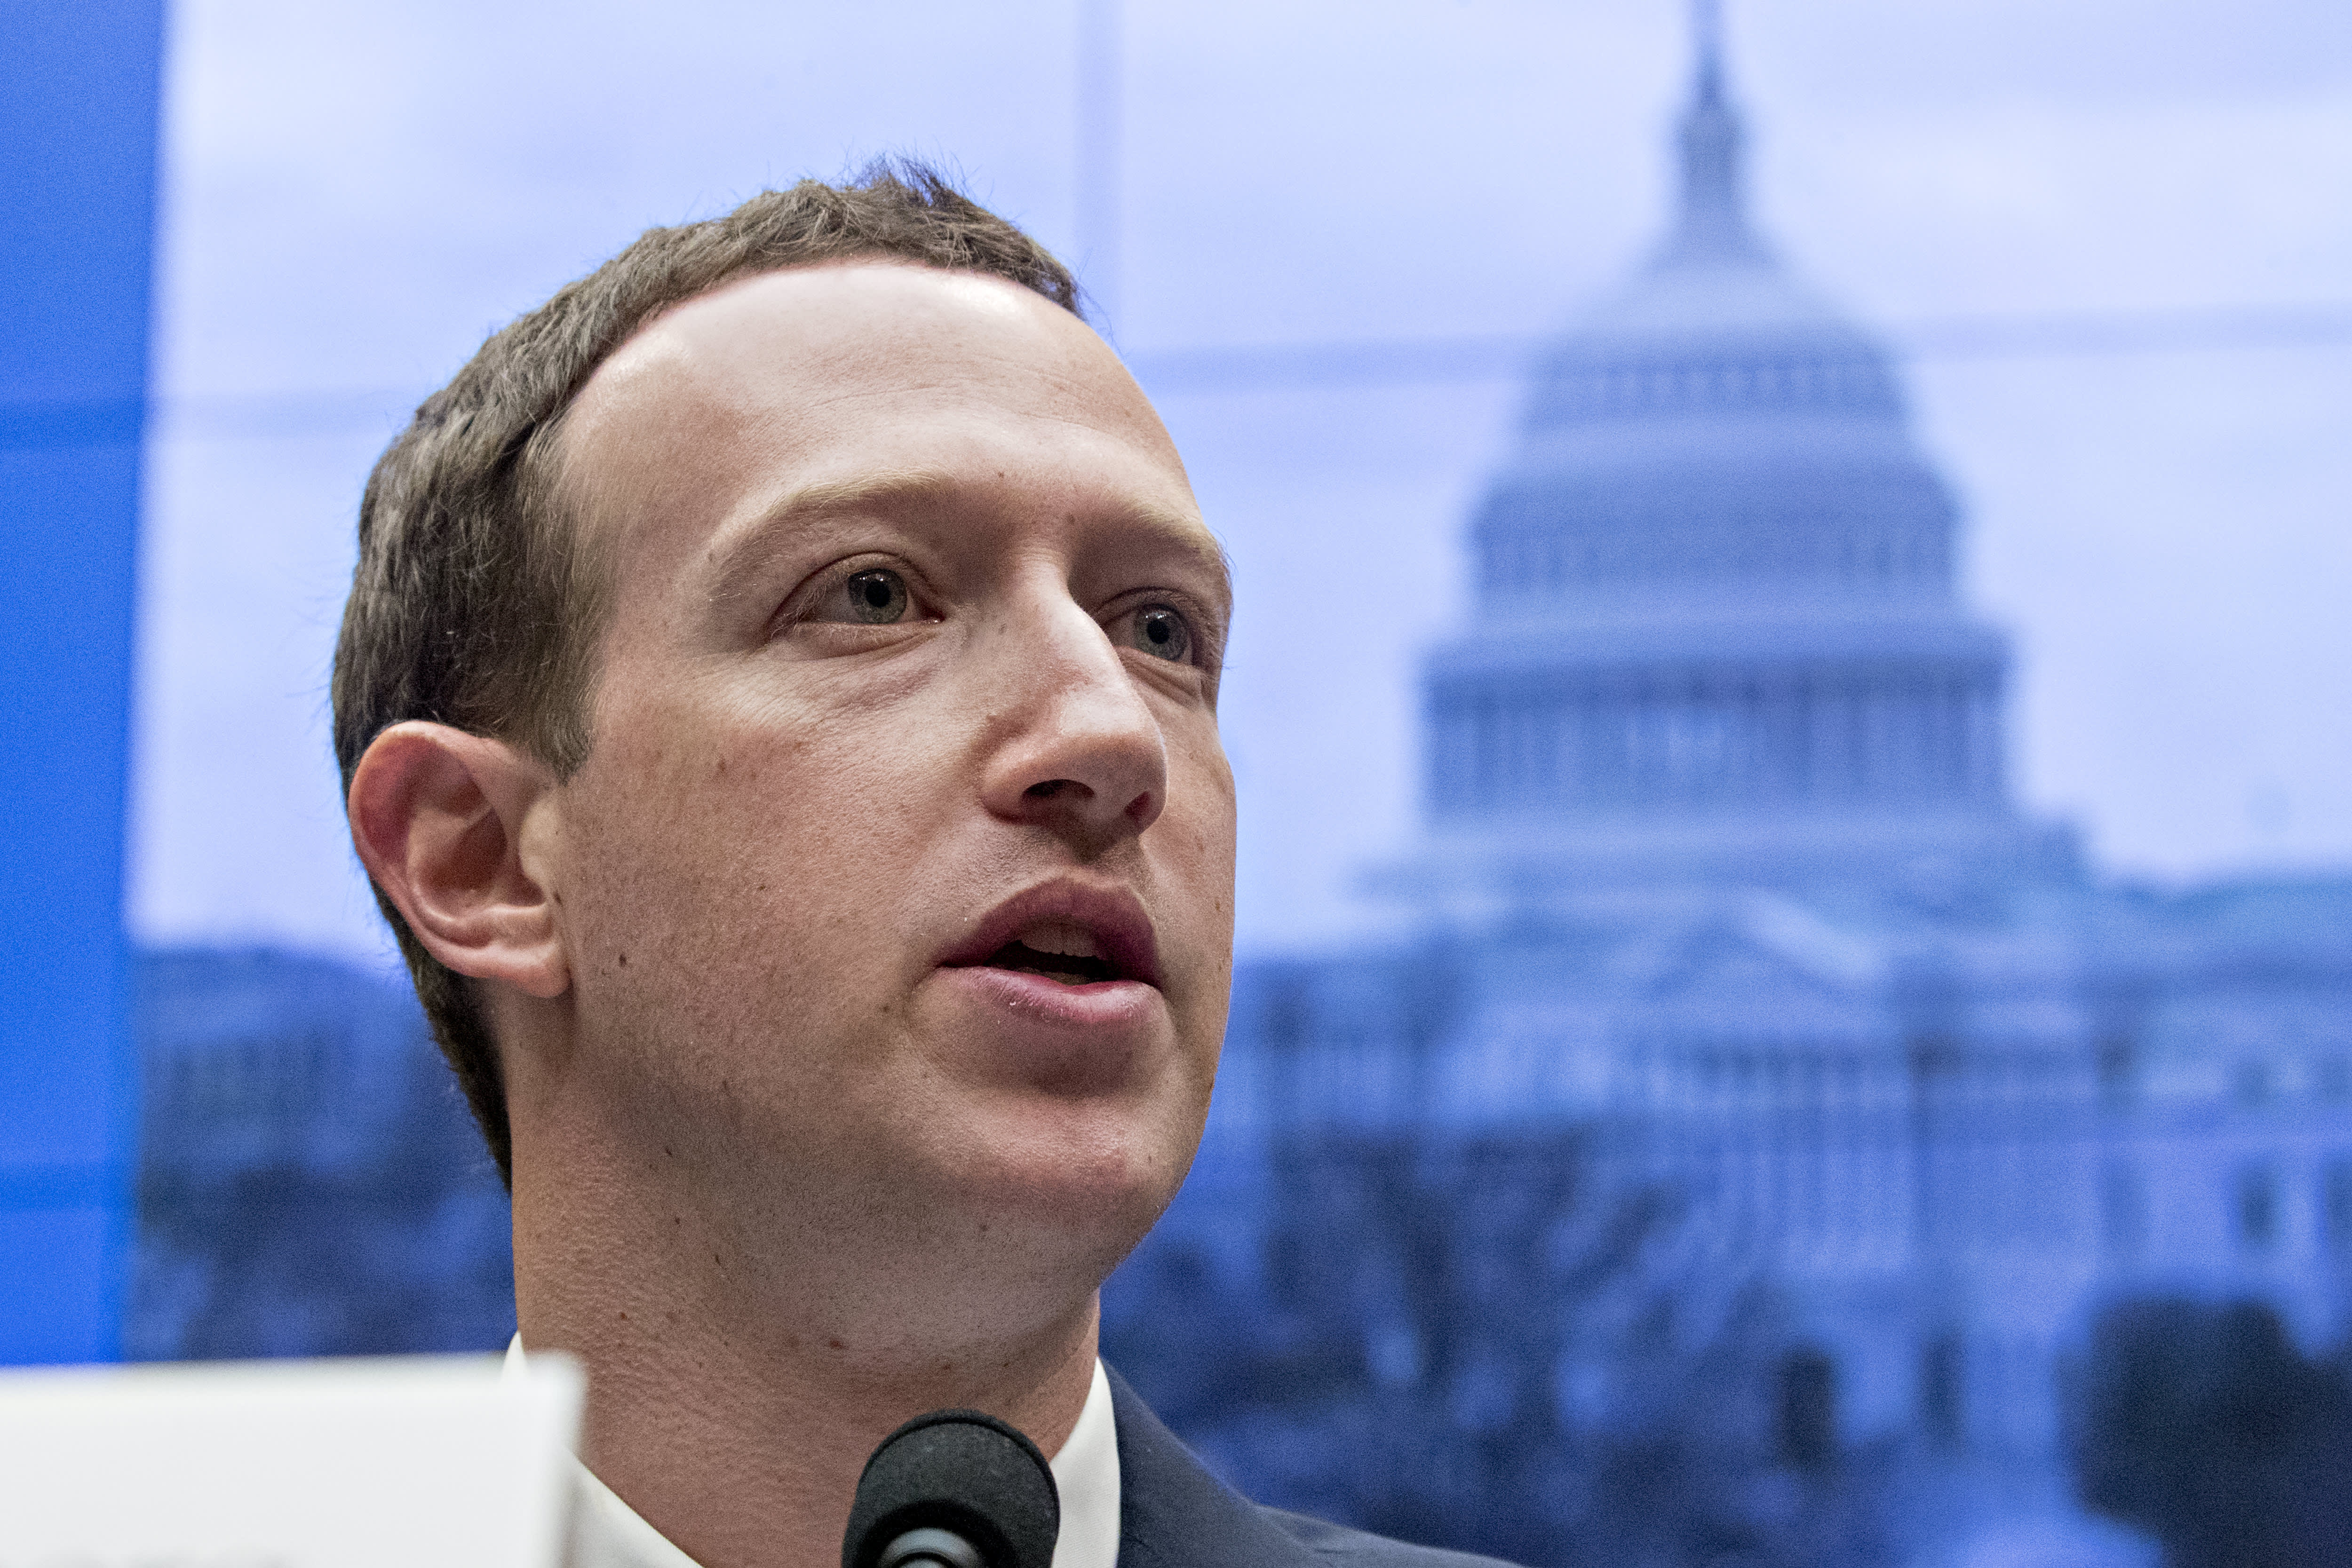 2022 will be the 'do or die' moment for Congress to take action against Big Tech